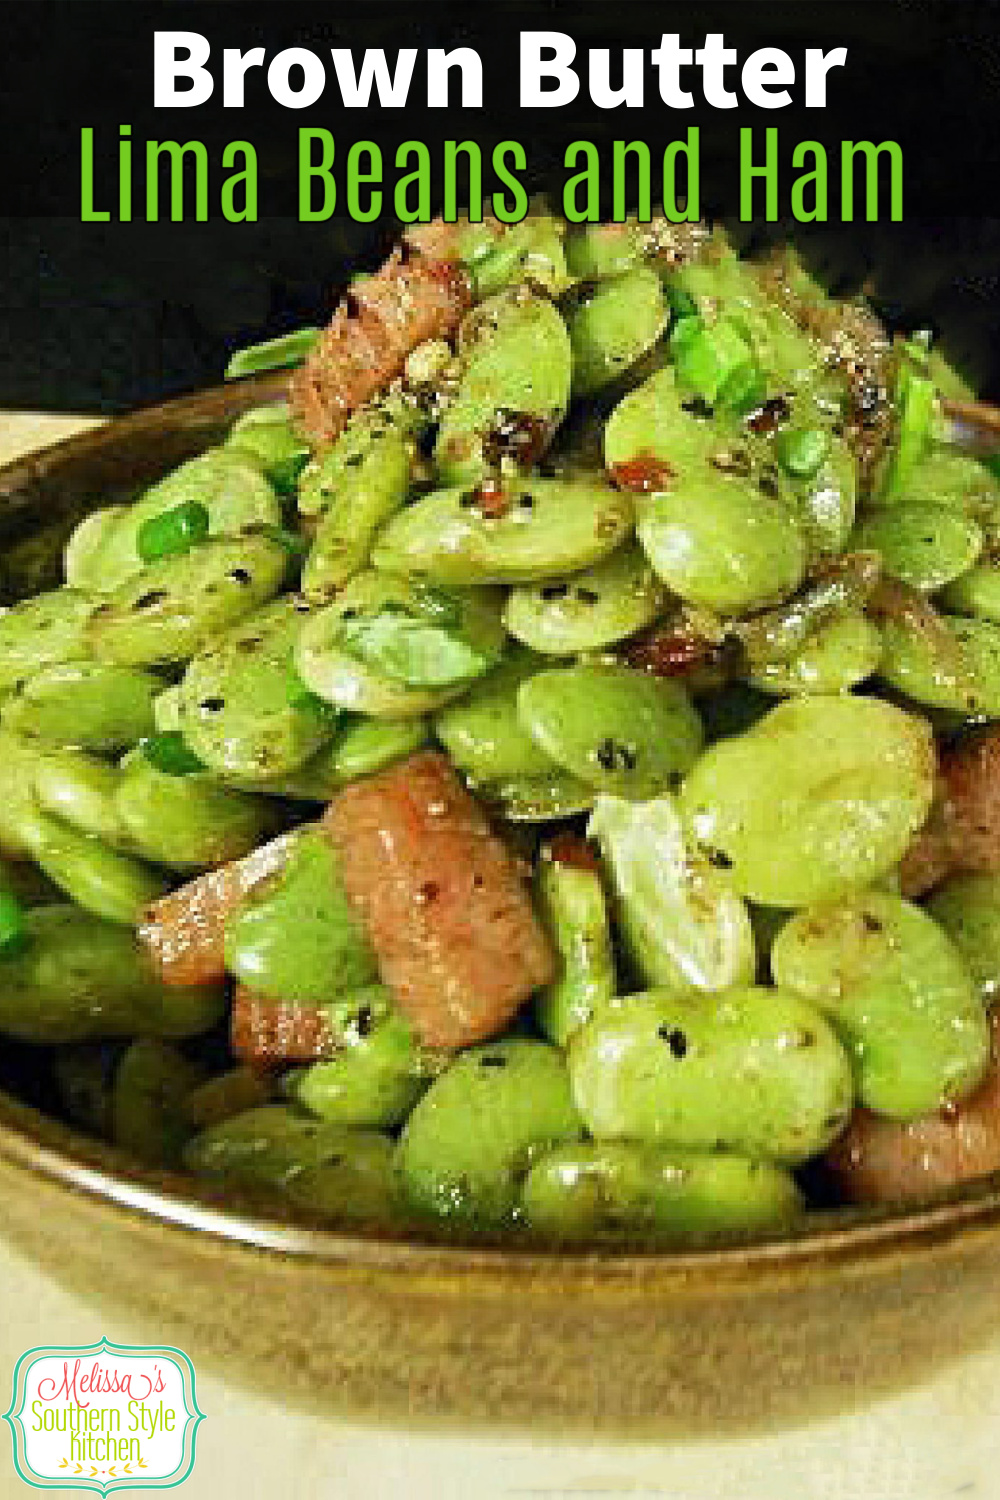 These Brown Butter Lima Beans with Ham are an upgrade on a country classic #limabeans #limabeansandham #leftoverhamrecipes #beans #limabeansrecipes #southernrecipes #easyrecipes #sidedishrecipes